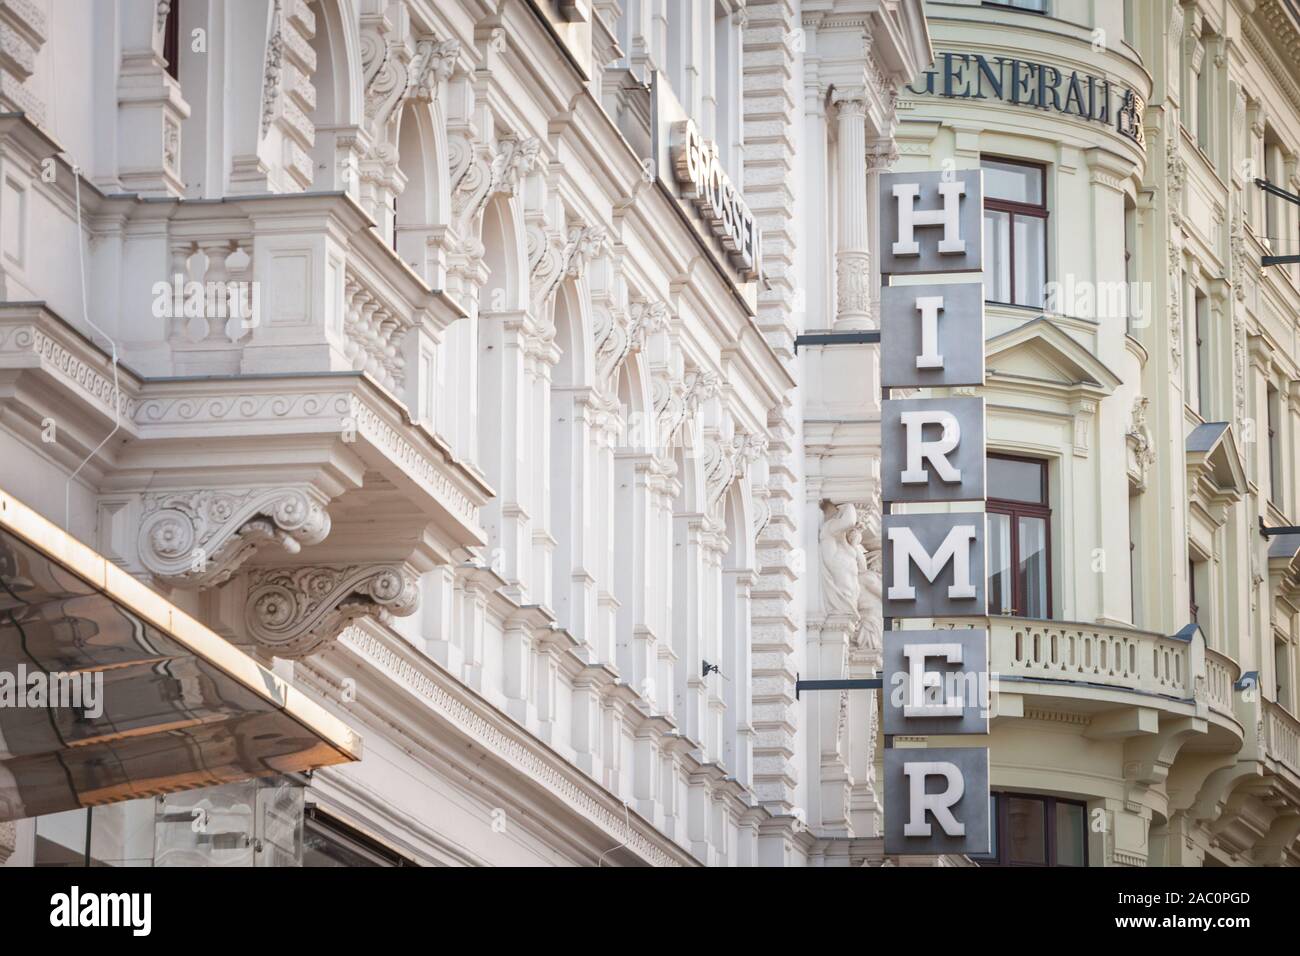 VIENNA, AUSTRIA - NOVEMBER 6, 2019: Hirmer department store logo in front of their boutique for Vienna. It is a German Bavarian chain of department st Stock Photo